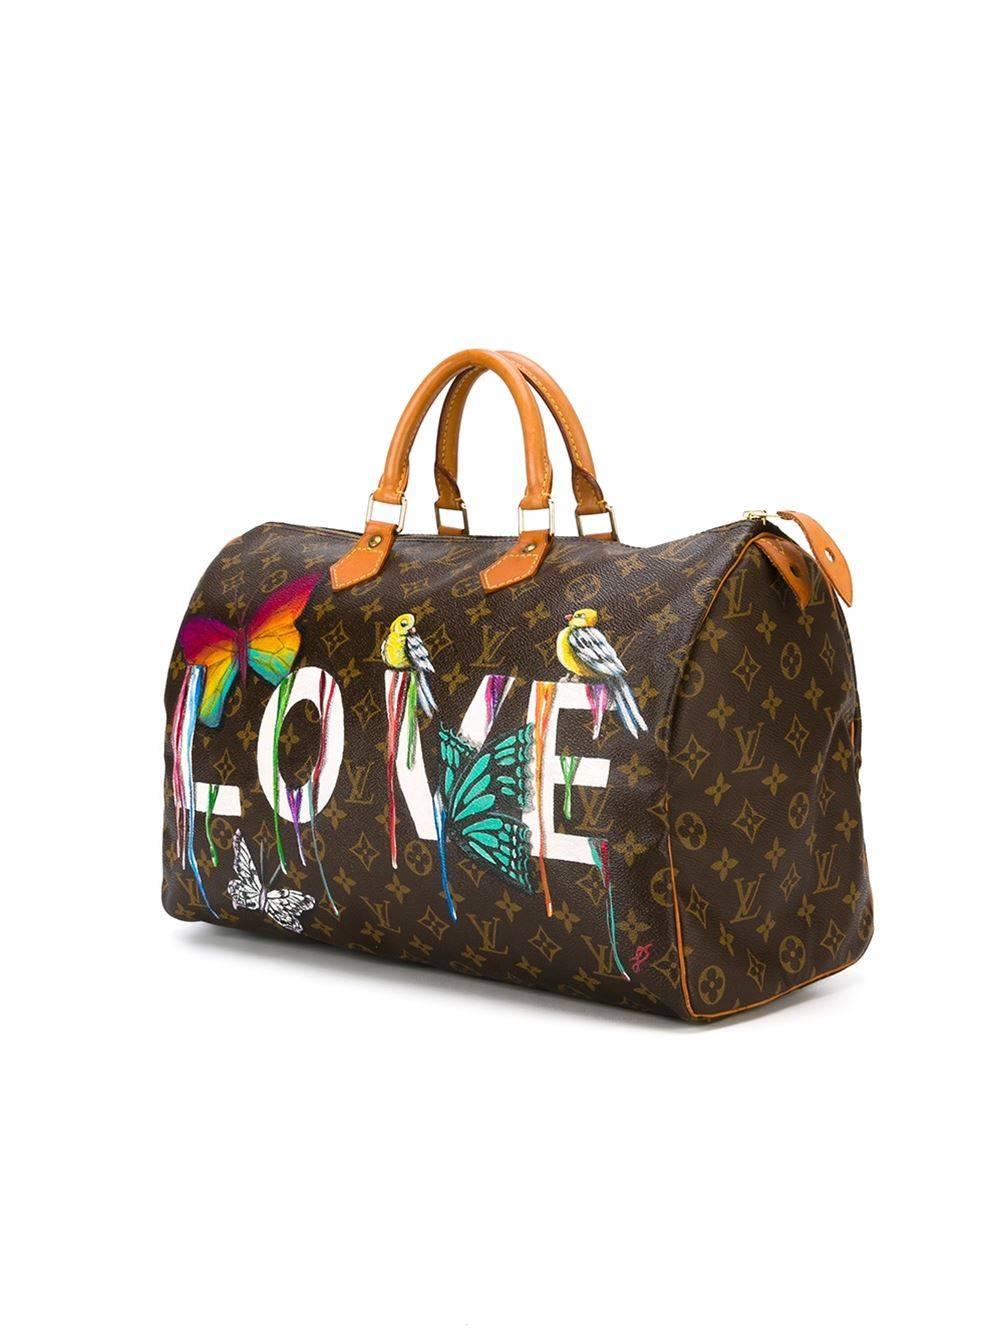 Hand-painted vintage Louis Vuitton monogram leather Speedy bag featuring a customised hand-painted design. 

Composition: Monogram Leather 

Colour: Brown, Hand-painted design 

Rewind Vintage Emotional Baggage

The brainchild of Rewind, these